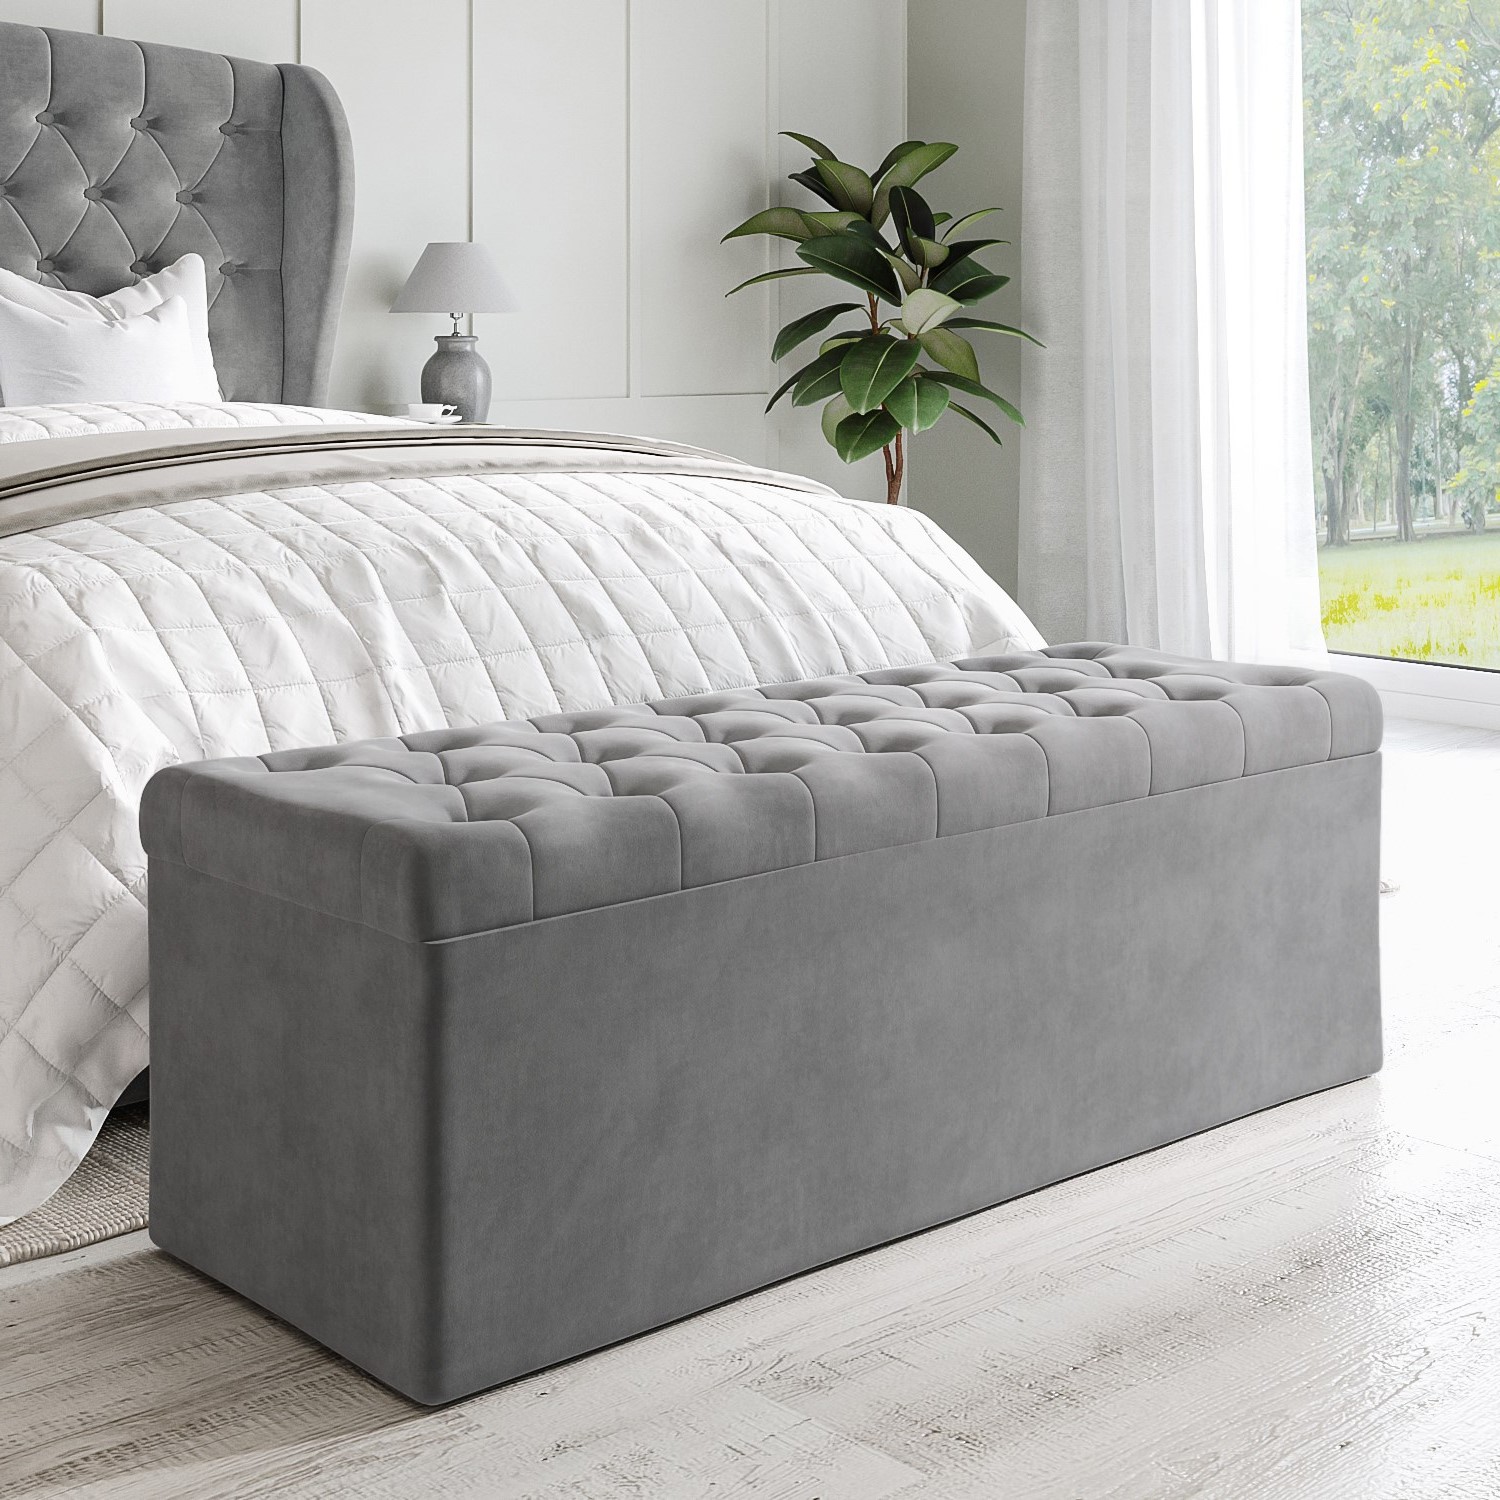 Read more about Grey velvet double ottoman bed with matching blanket box